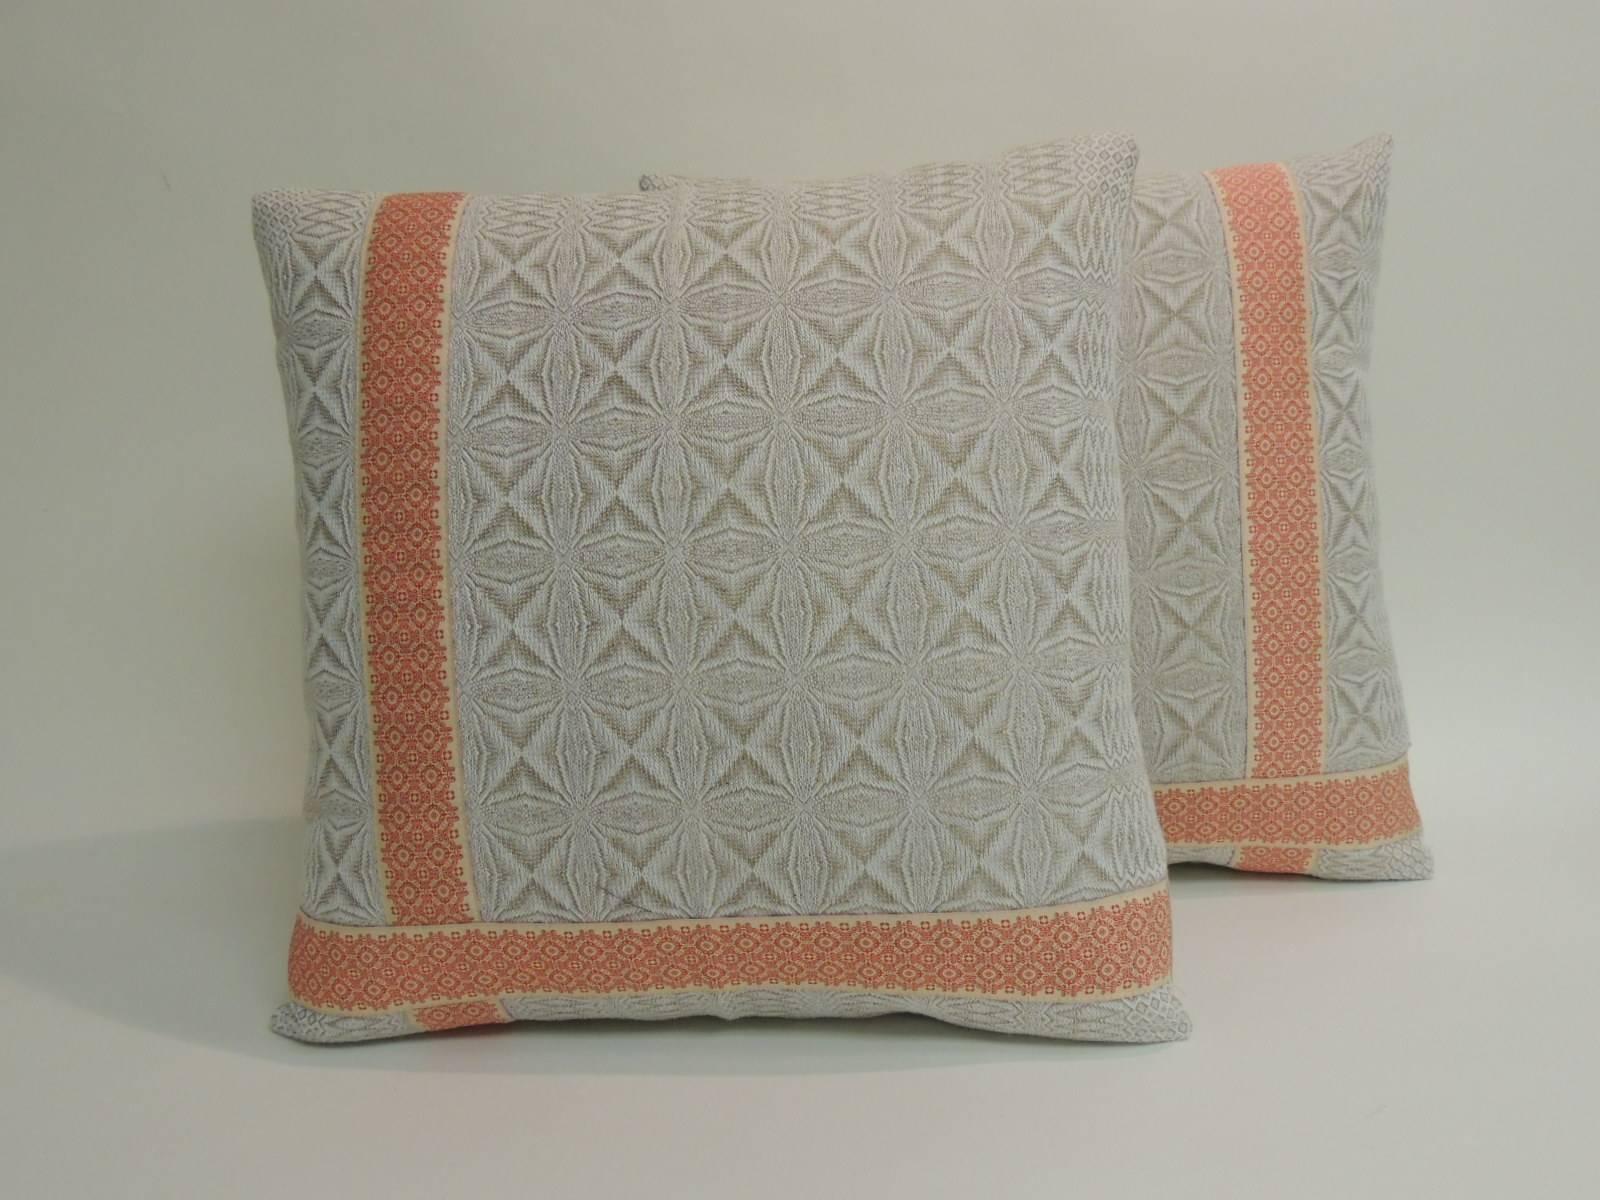 Pair of vintage woven Swedish decorative pillows with ribbon accents and natural linen backings.
Decorative pillow handcrafted and designed in the USA.
Closure by stitch (no zipper closure) with custom made pillow insert.
Size: 18 x 18 x 6.
Offered